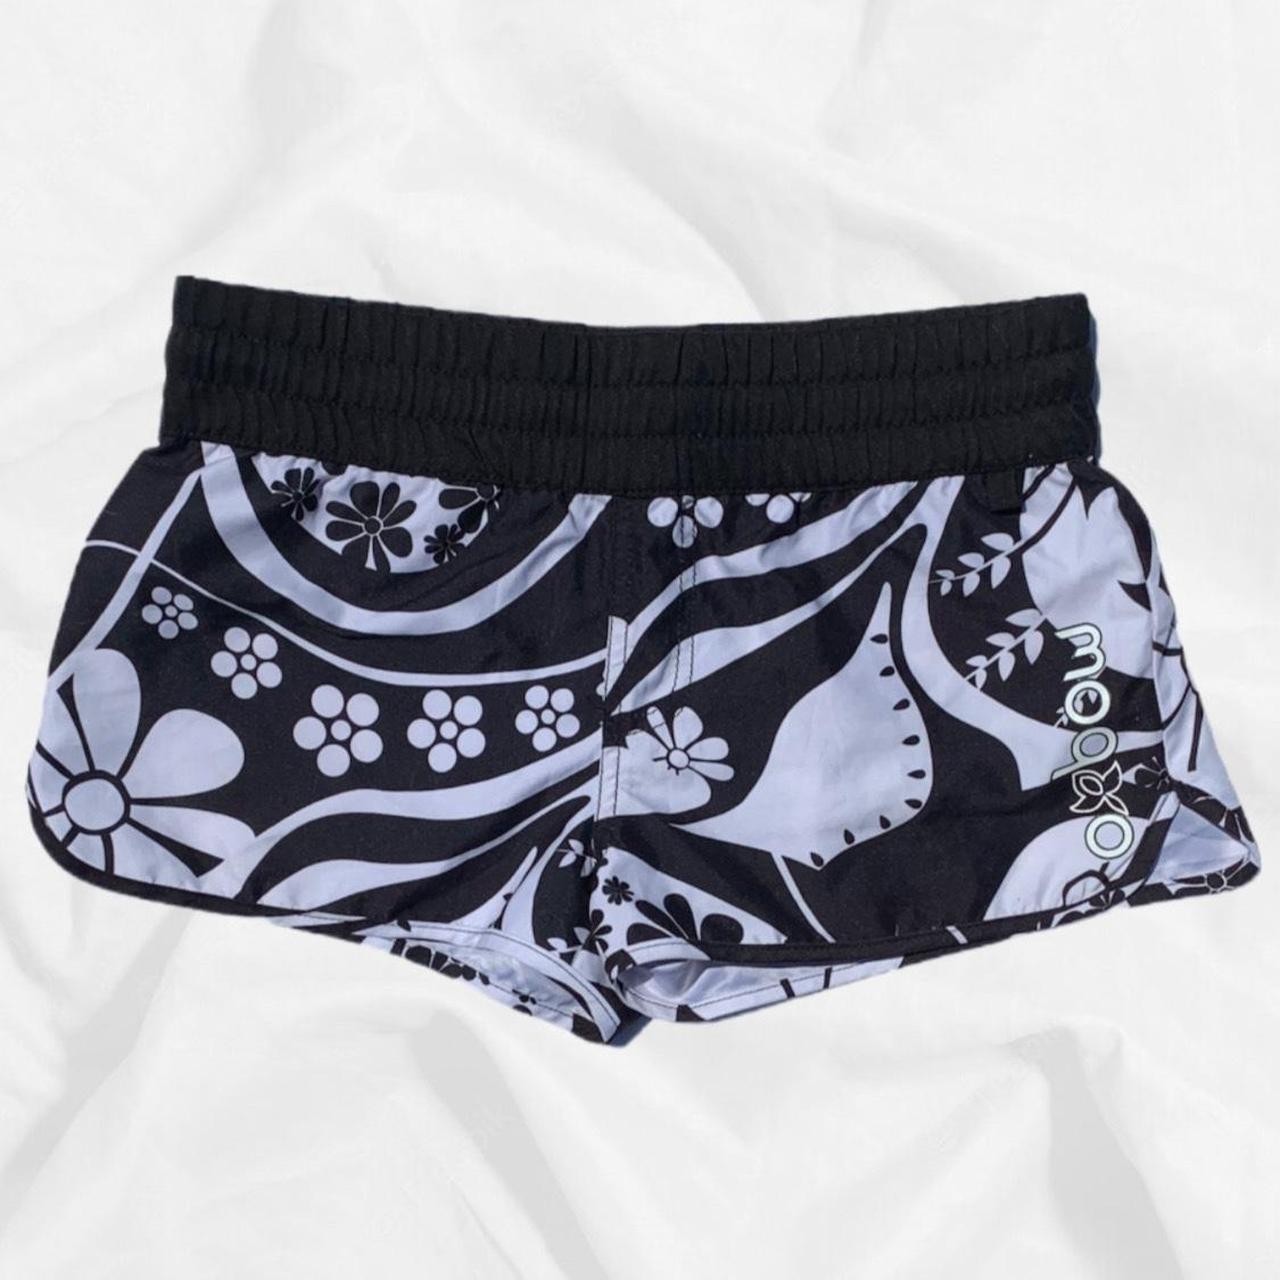 Product Image 1 - Oxbow Hibiscus Beach Shorts

Labelled as